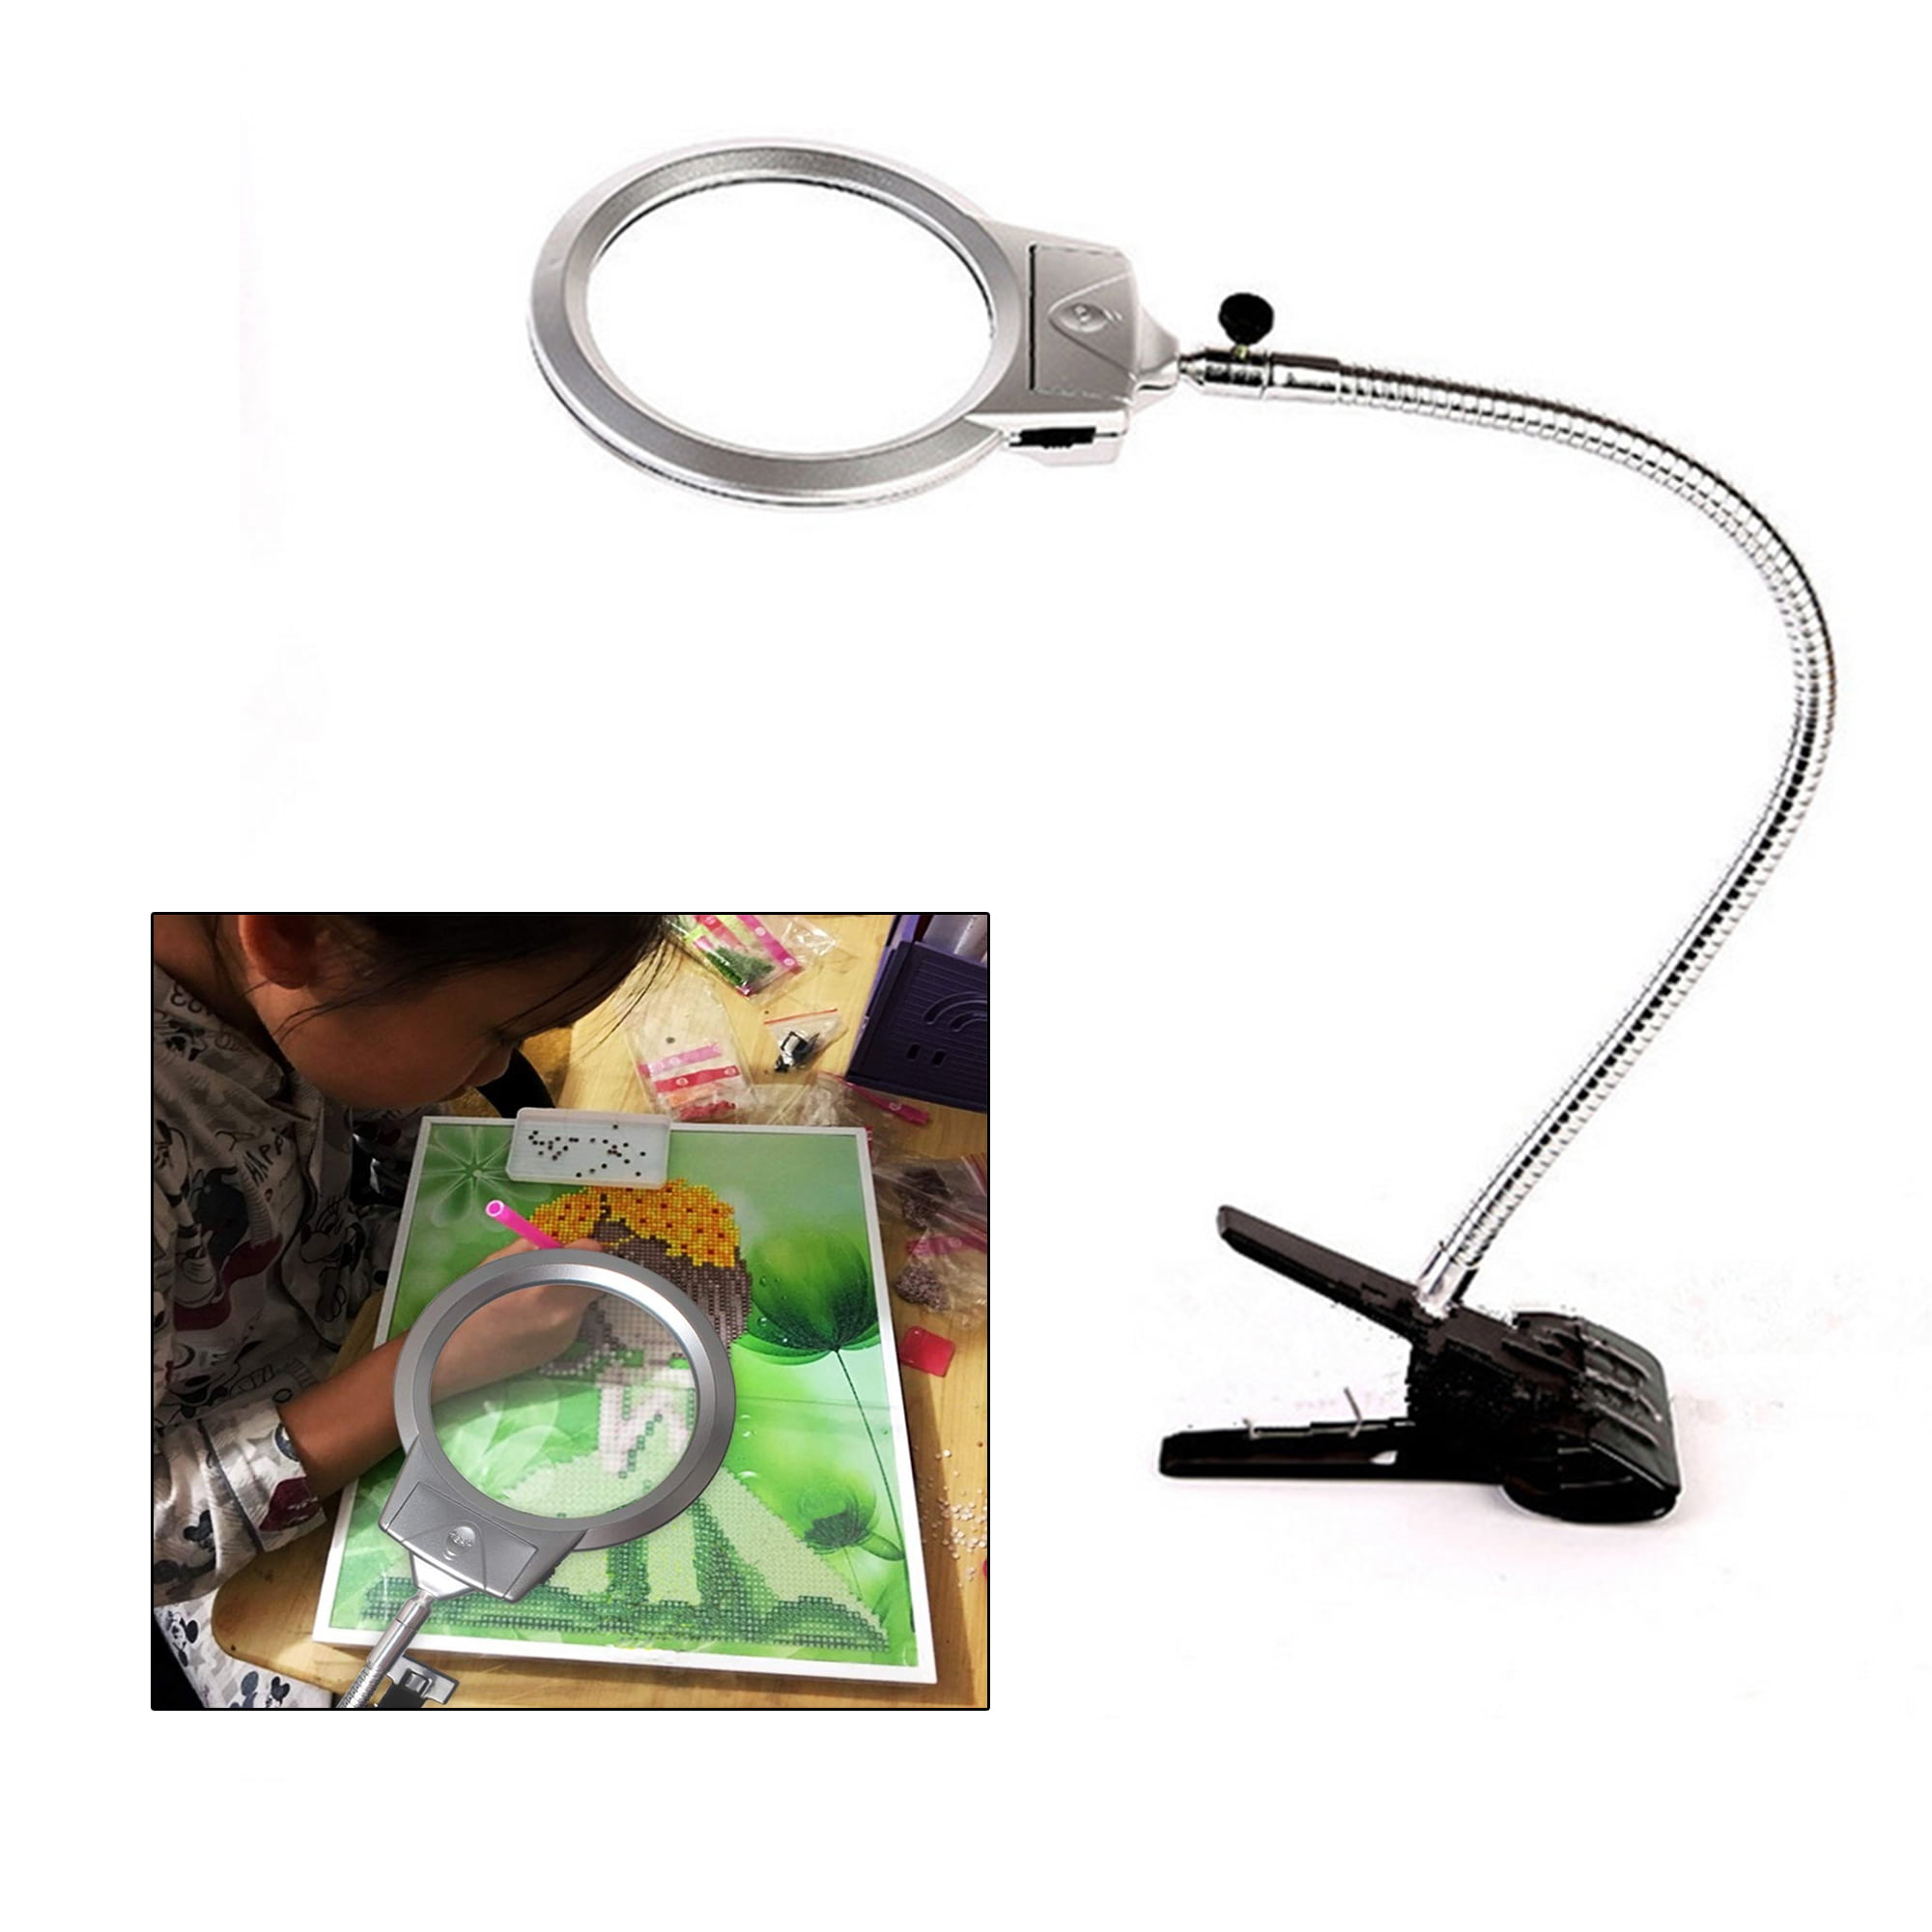 Ideal for all Hobbies Sewing Handy Pocket Sized Light/Magnifier Crafts etc 